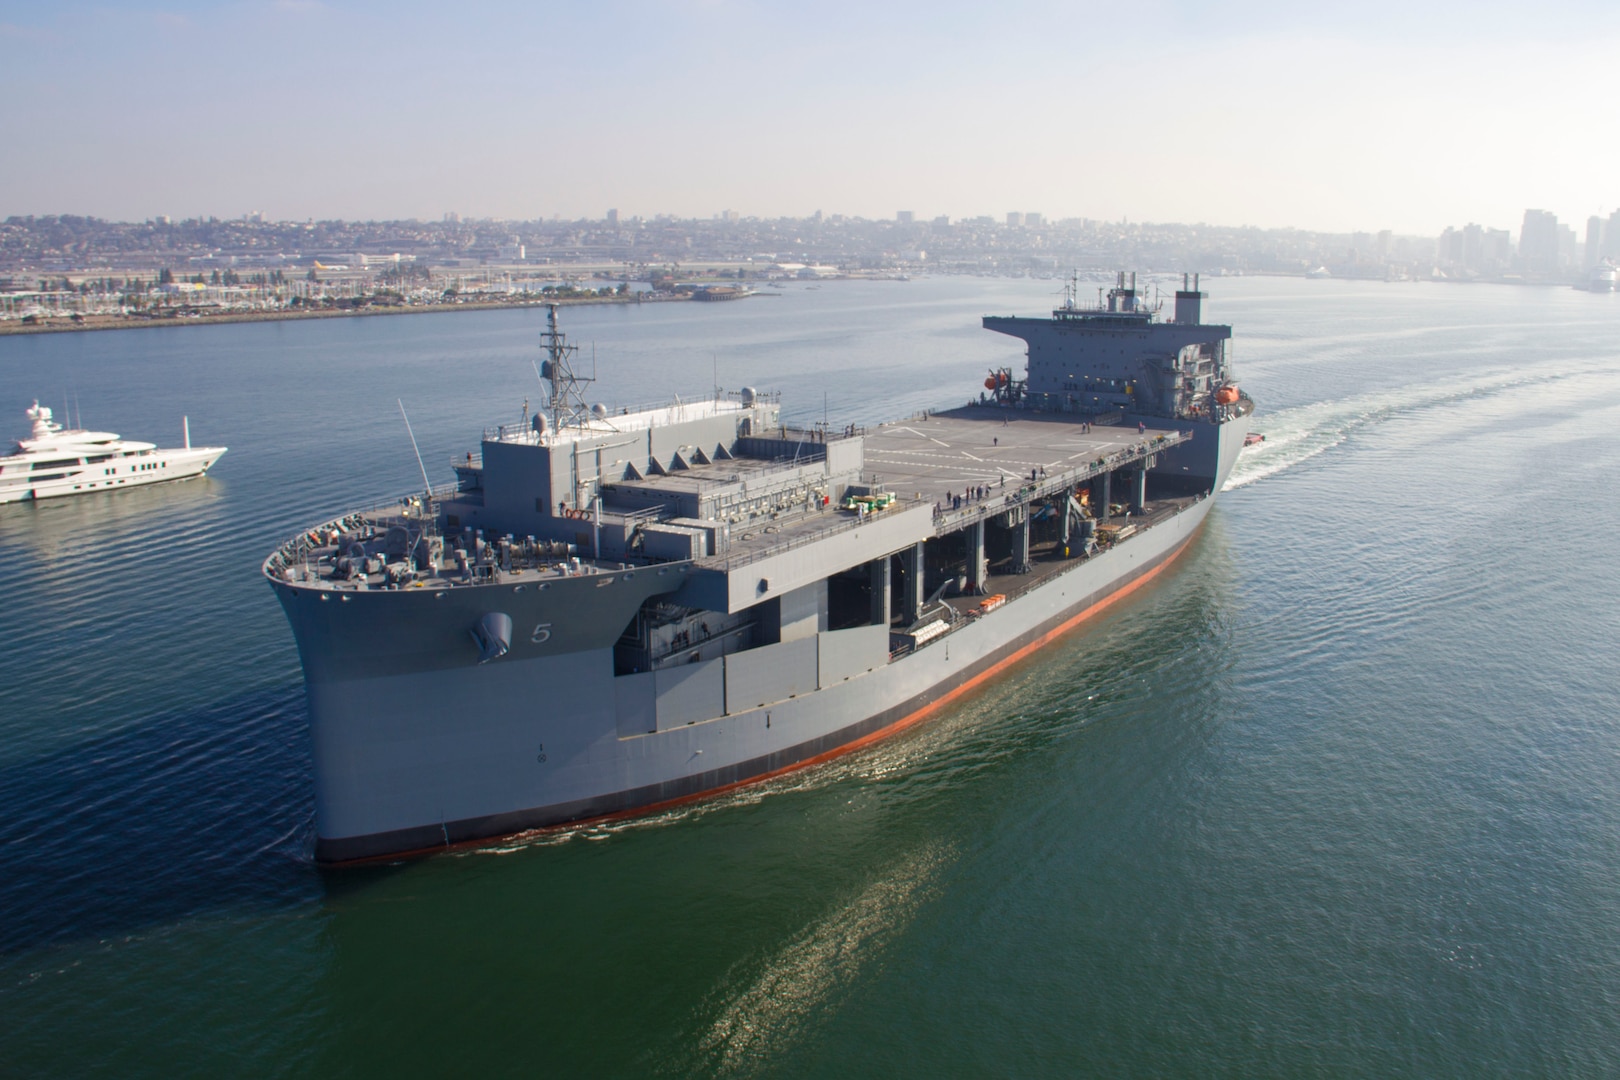 The future USNS Miguel Keith (ESB 5) departs General Dynamics National Steel and Shipbuilding Co. shipyard in San Diego, Calif. During the weeklong acceptance trials, the Navy's Board of Inspection and Survey conducted comprehensive tests to demonstrate and evaluate the performance of all of the ship's major systems.